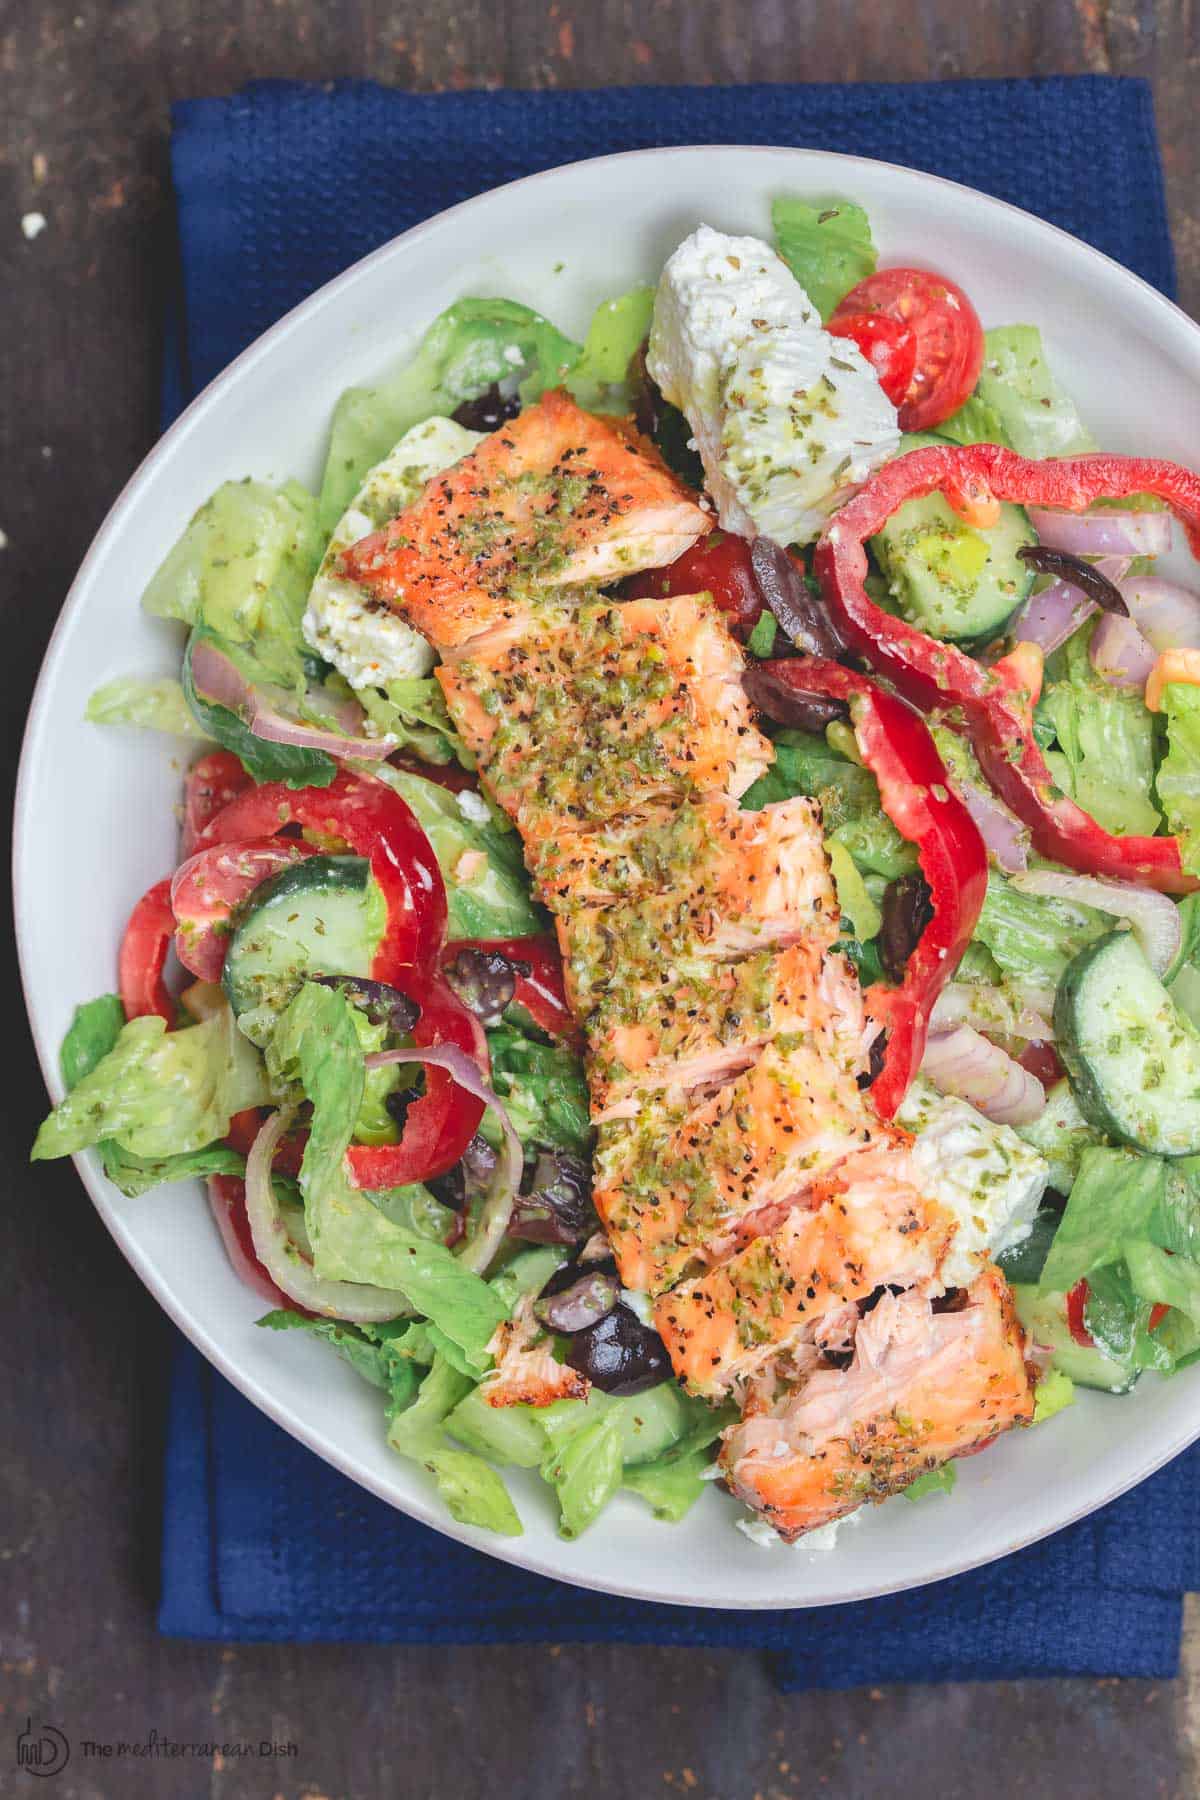 Salmon on top of lettuce, bell peppers, tomatoes and more